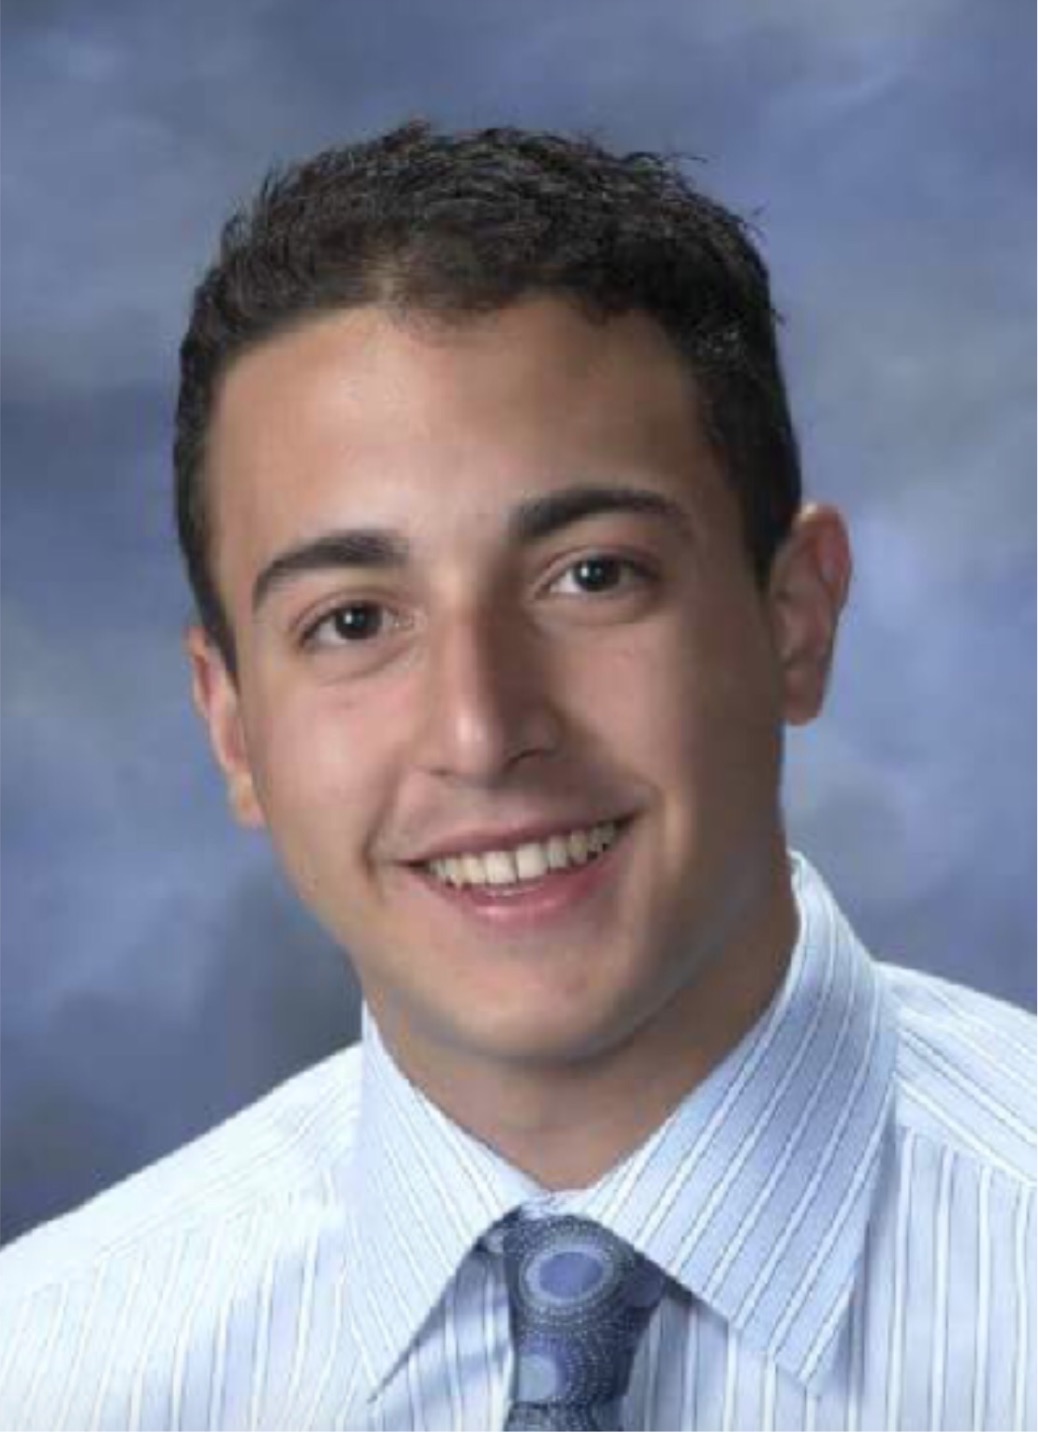 Peter Angelone's senior yearbook photo, Prout High School 2008.